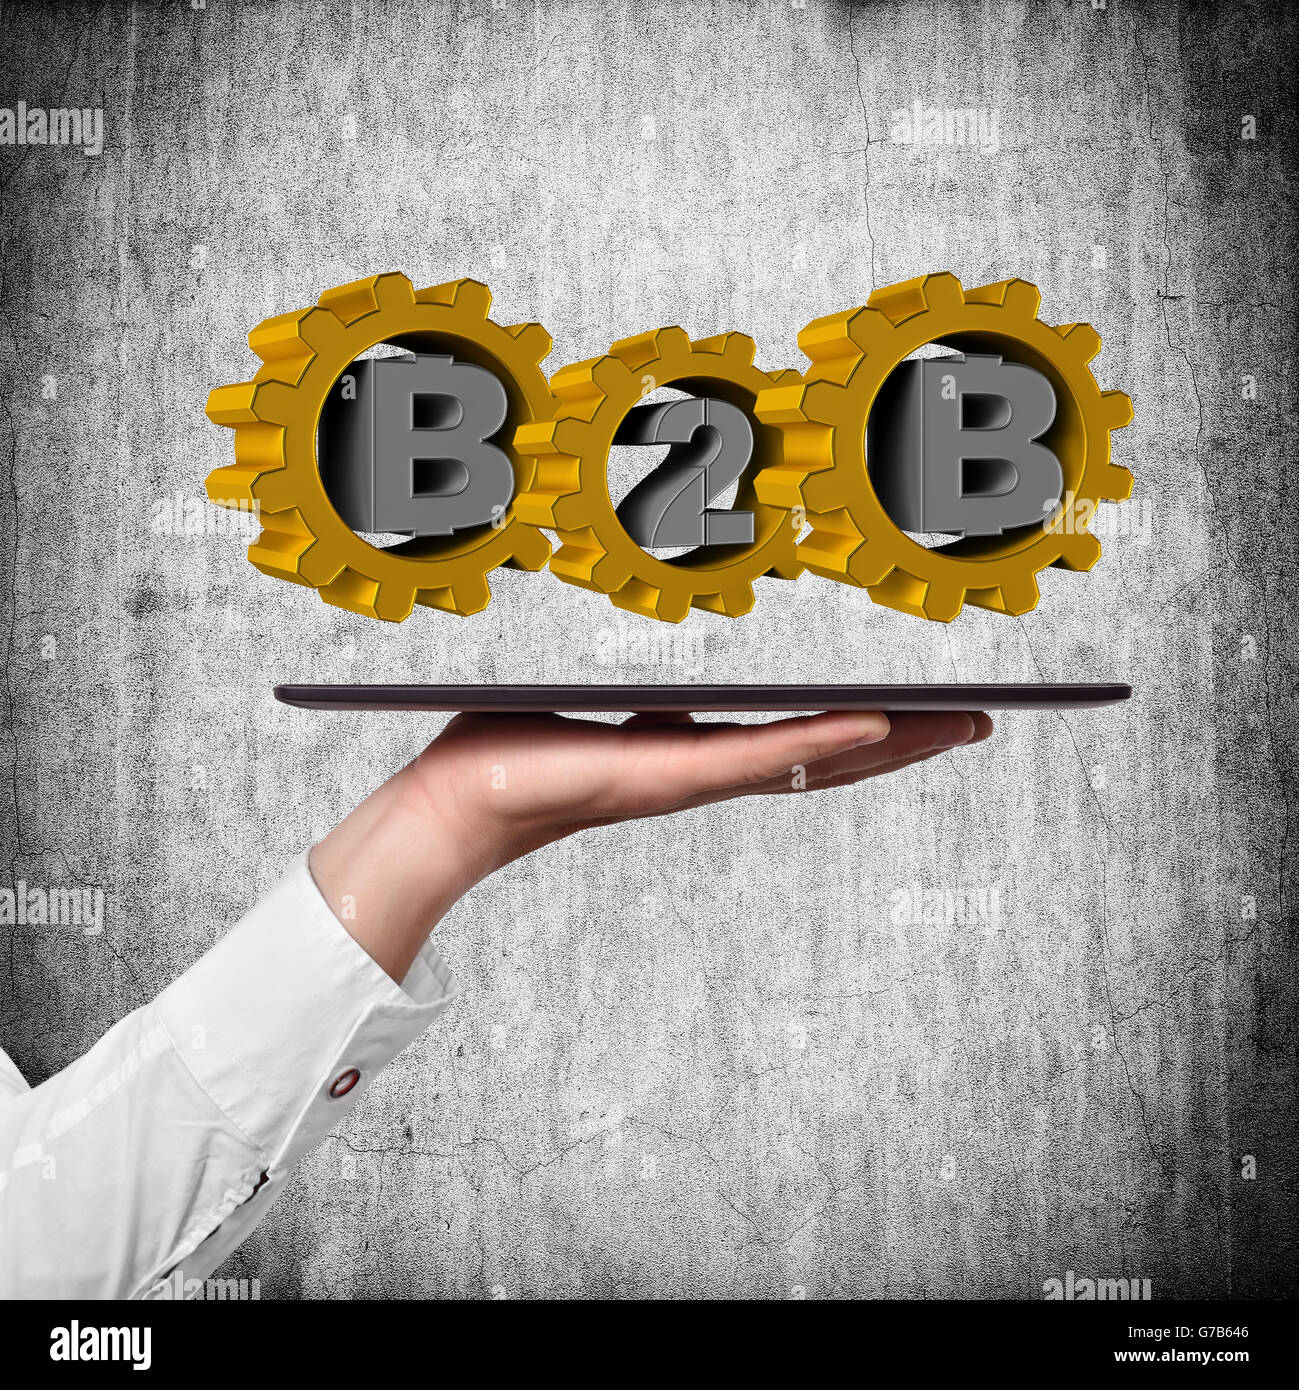 hand holding tablet with b2b symbol on a wall background Stock Photo